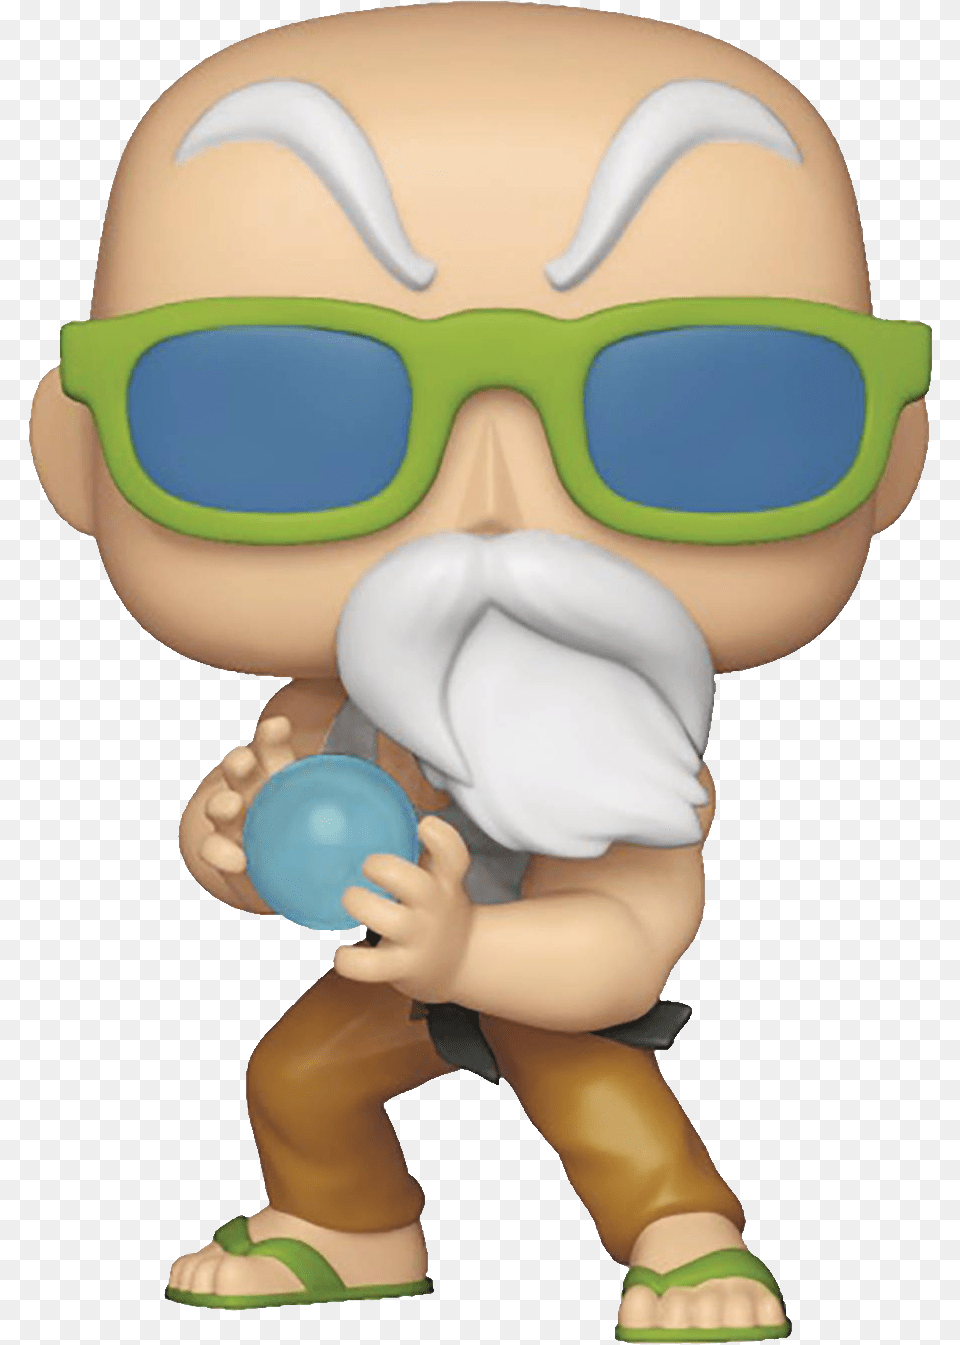 Pop Specialty Series Dragon Ball Z Dragon Ball Z Master Roshi Pop Figure, Accessories, Sunglasses, Toy, Glasses Png